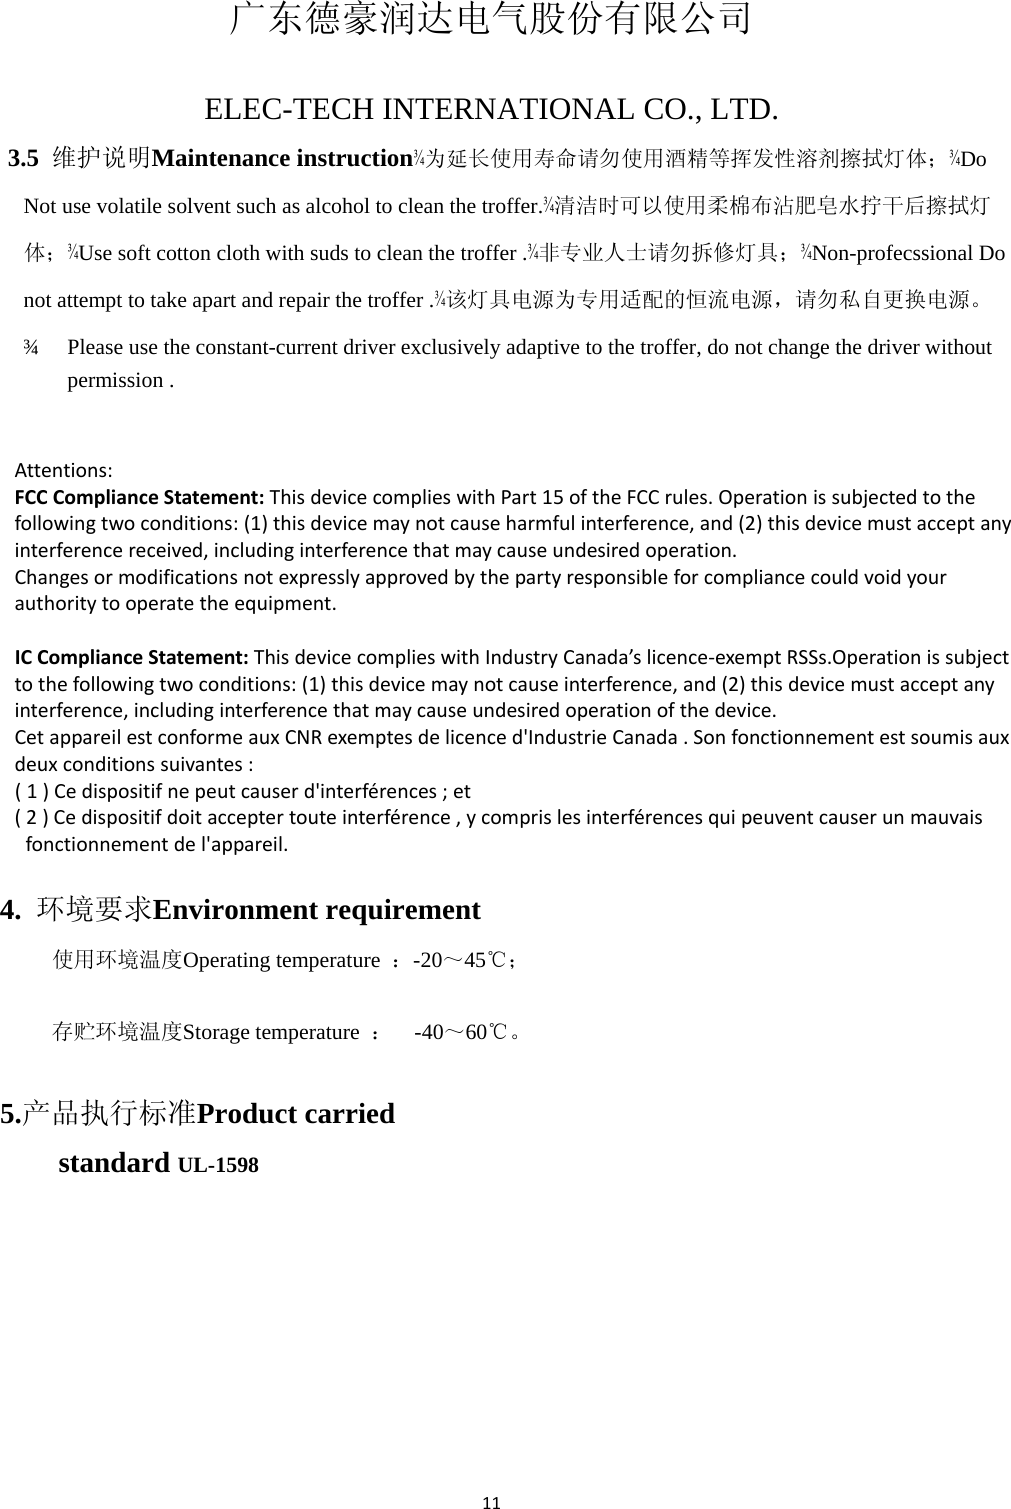 11 广东德豪润达电气股份有限公司   ELEC-TECH INTERNATIONAL CO., LTD.   3.5  维护说明Maintenance instruction¾为延长使用寿命请勿使用酒精等挥发性溶剂擦拭灯体；¾Do Not use volatile solvent such as alcohol to clean the troffer.¾清洁时可以使用柔棉布沾肥皂水拧干后擦拭灯体；¾Use soft cotton cloth with suds to clean the troffer .¾非专业人士请勿拆修灯具；¾Non-profecssional Do not attempt to take apart and repair the troffer .¾该灯具电源为专用适配的恒流电源，请勿私自更换电源。 ¾  Please use the constant-current driver exclusively adaptive to the troffer, do not change the driver without permission .   Attentions:FCCComplianceStatement:ThisdevicecomplieswithPart15oftheFCCrules.Operationissubjectedtothefollowingtwoconditions:(1)thisdevicemaynotcauseharmfulinterference,and(2)thisdevicemustacceptanyinterferencereceived,includinginterferencethatmaycauseundesiredoperation.Changesormodificationsnotexpresslyapprovedbythepartyresponsibleforcompliancecouldvoidyourauthoritytooperatetheequipment. ICComplianceStatement:ThisdevicecomplieswithIndustryCanada’slicence‐exemptRSSs.Operationissubjecttothefollowingtwoconditions:(1)thisdevicemaynotcauseinterference,and(2)thisdevicemustacceptanyinterference,includinginterferencethatmaycauseundesiredoperationofthedevice.CetappareilestconformeauxCNRexemptesdelicenced&apos;IndustrieCanada.Sonfonctionnementestsoumisauxdeuxconditionssuivantes:(1)Cedispositifnepeutcauserd&apos;interférences;et(2)Cedispositifdoitacceptertouteinterférence,ycomprislesinterférencesquipeuventcauserunmauvaisfonctionnementdel&apos;appareil. 4.  环境要求Environment requirement   使用环境温度Operating temperature  ：-20～45℃； 存贮环境温度Storage temperature  ：  -40～60℃。 5.产品执行标准Product carried standard UL-1598   